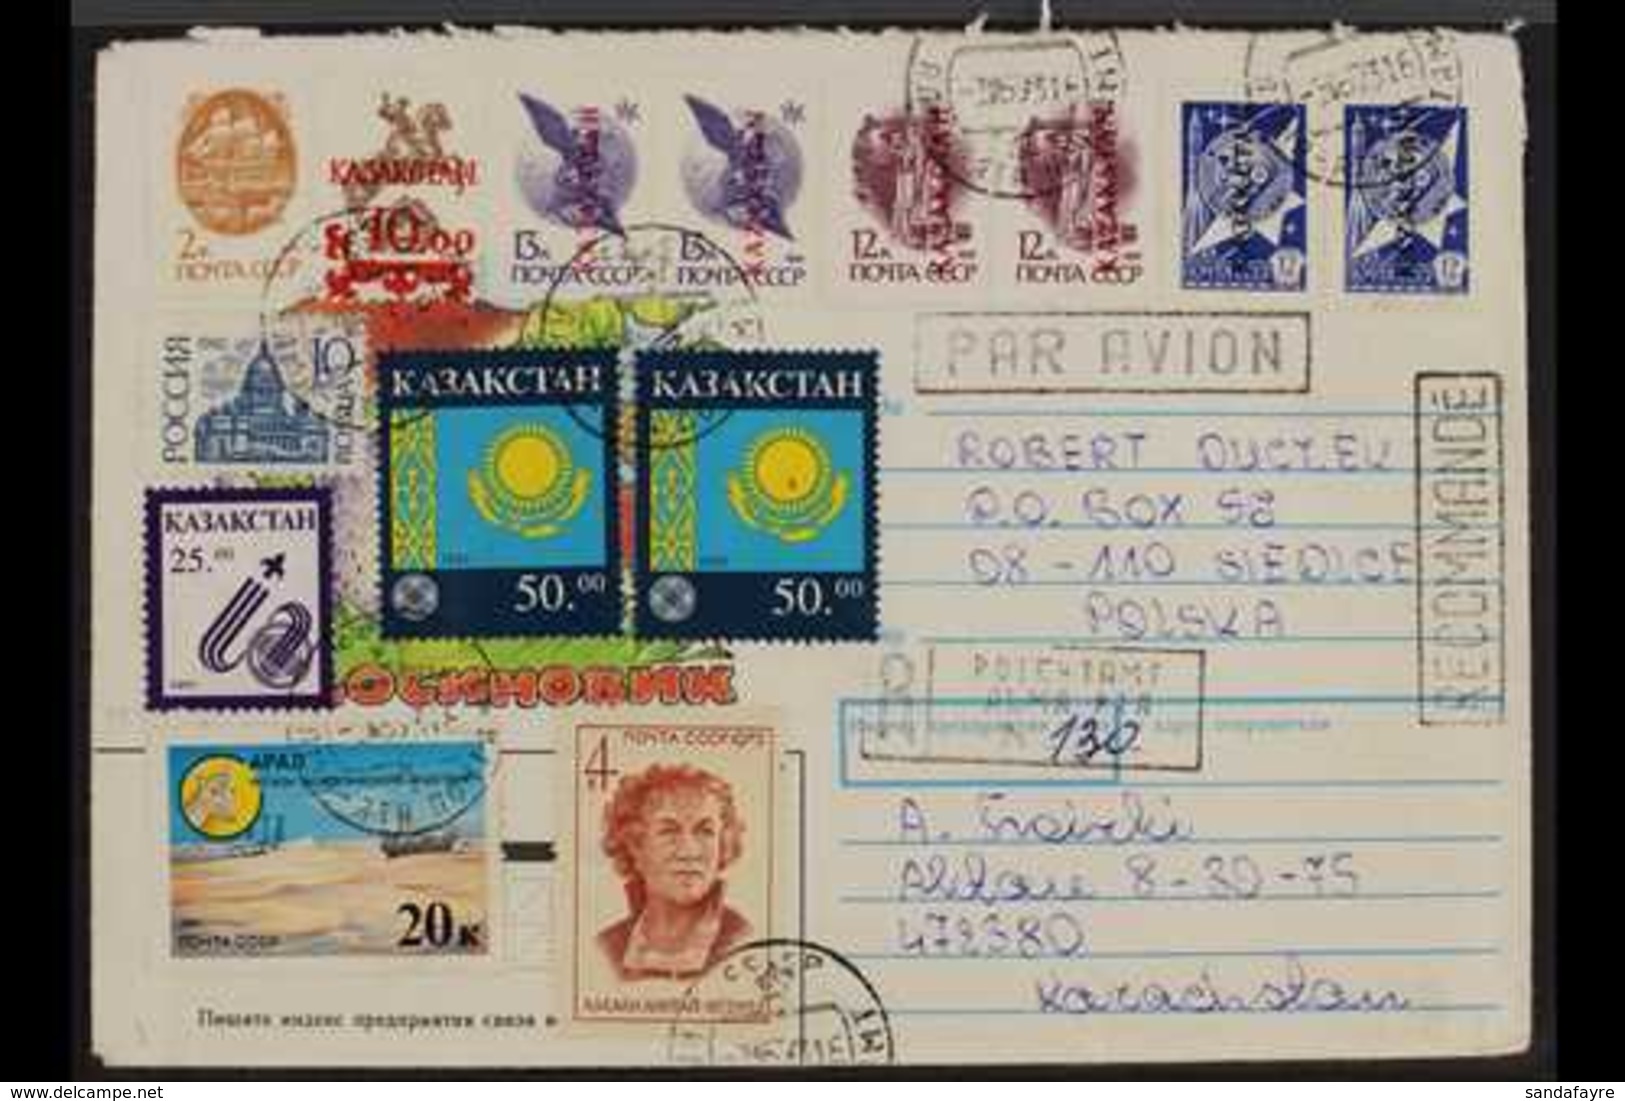 1993 (June) Registered Cover Addressed To Poland, Bearing Mixed Franking Of Soviet Union, Russi And Kazakhstan Stamps (t - Kazakhstan